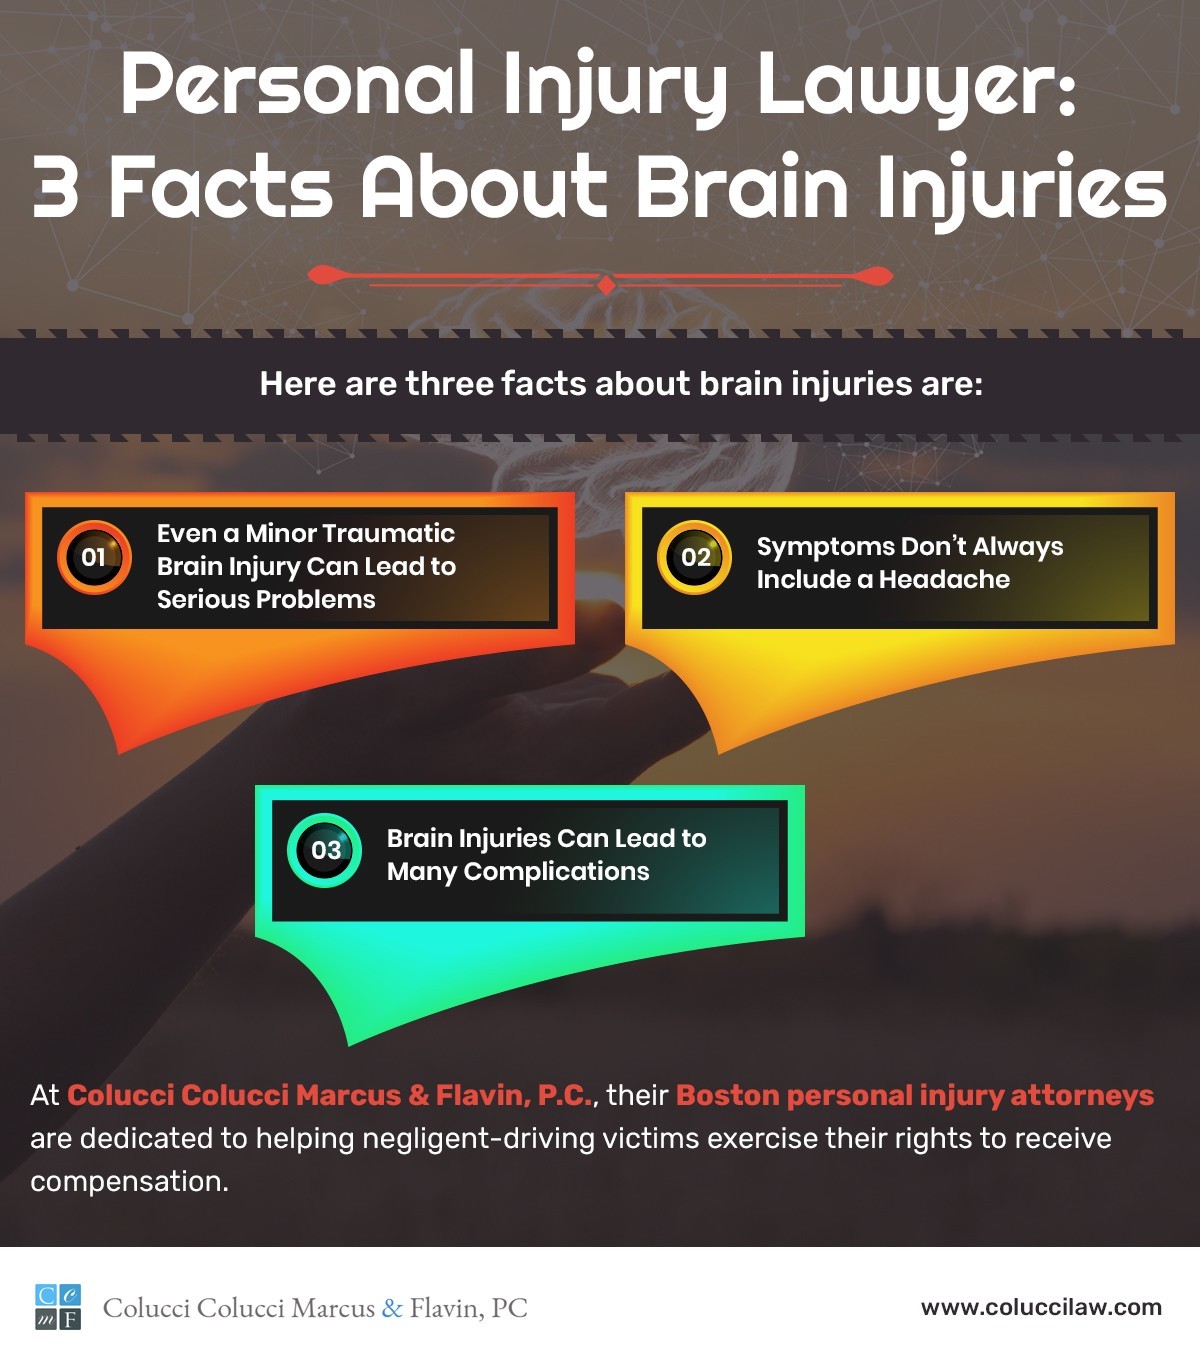 Personal-Injury Lawyer: 3 Facts About Brain Injuries